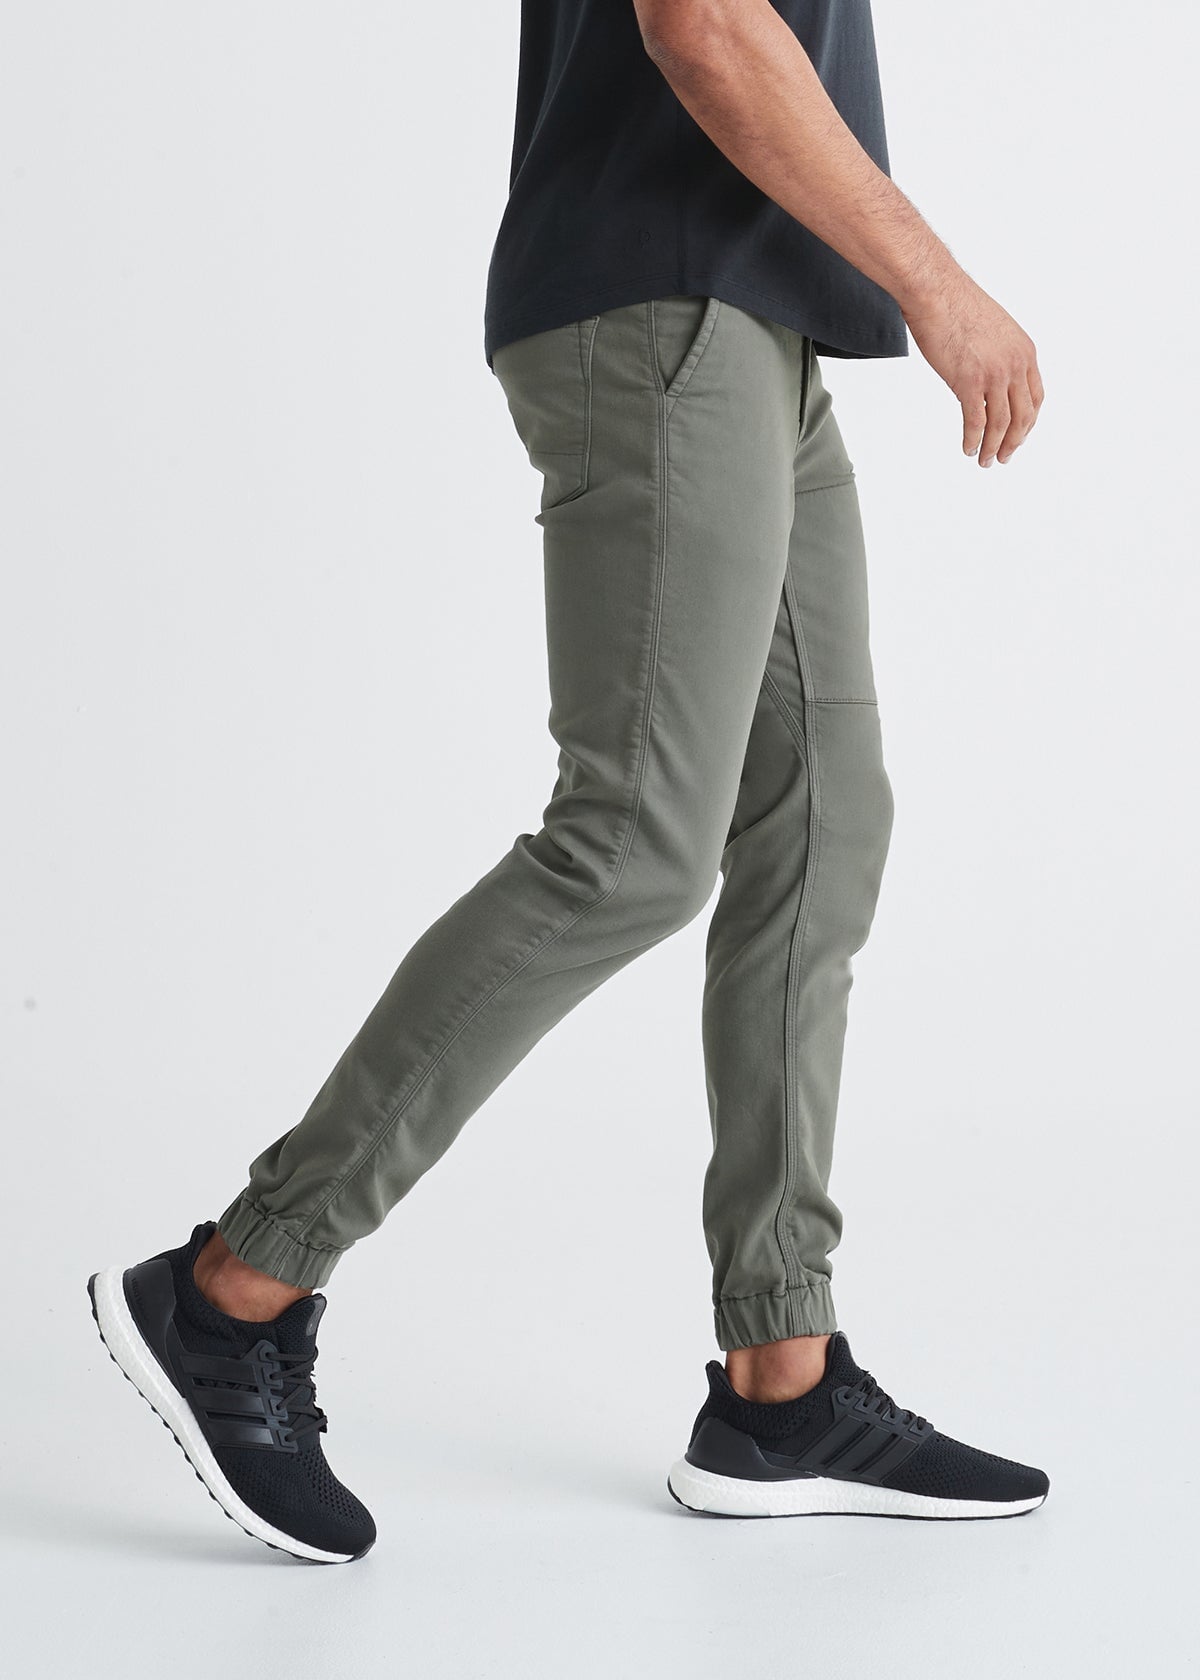 Sweat joggers in 100% cotton - Light Gray